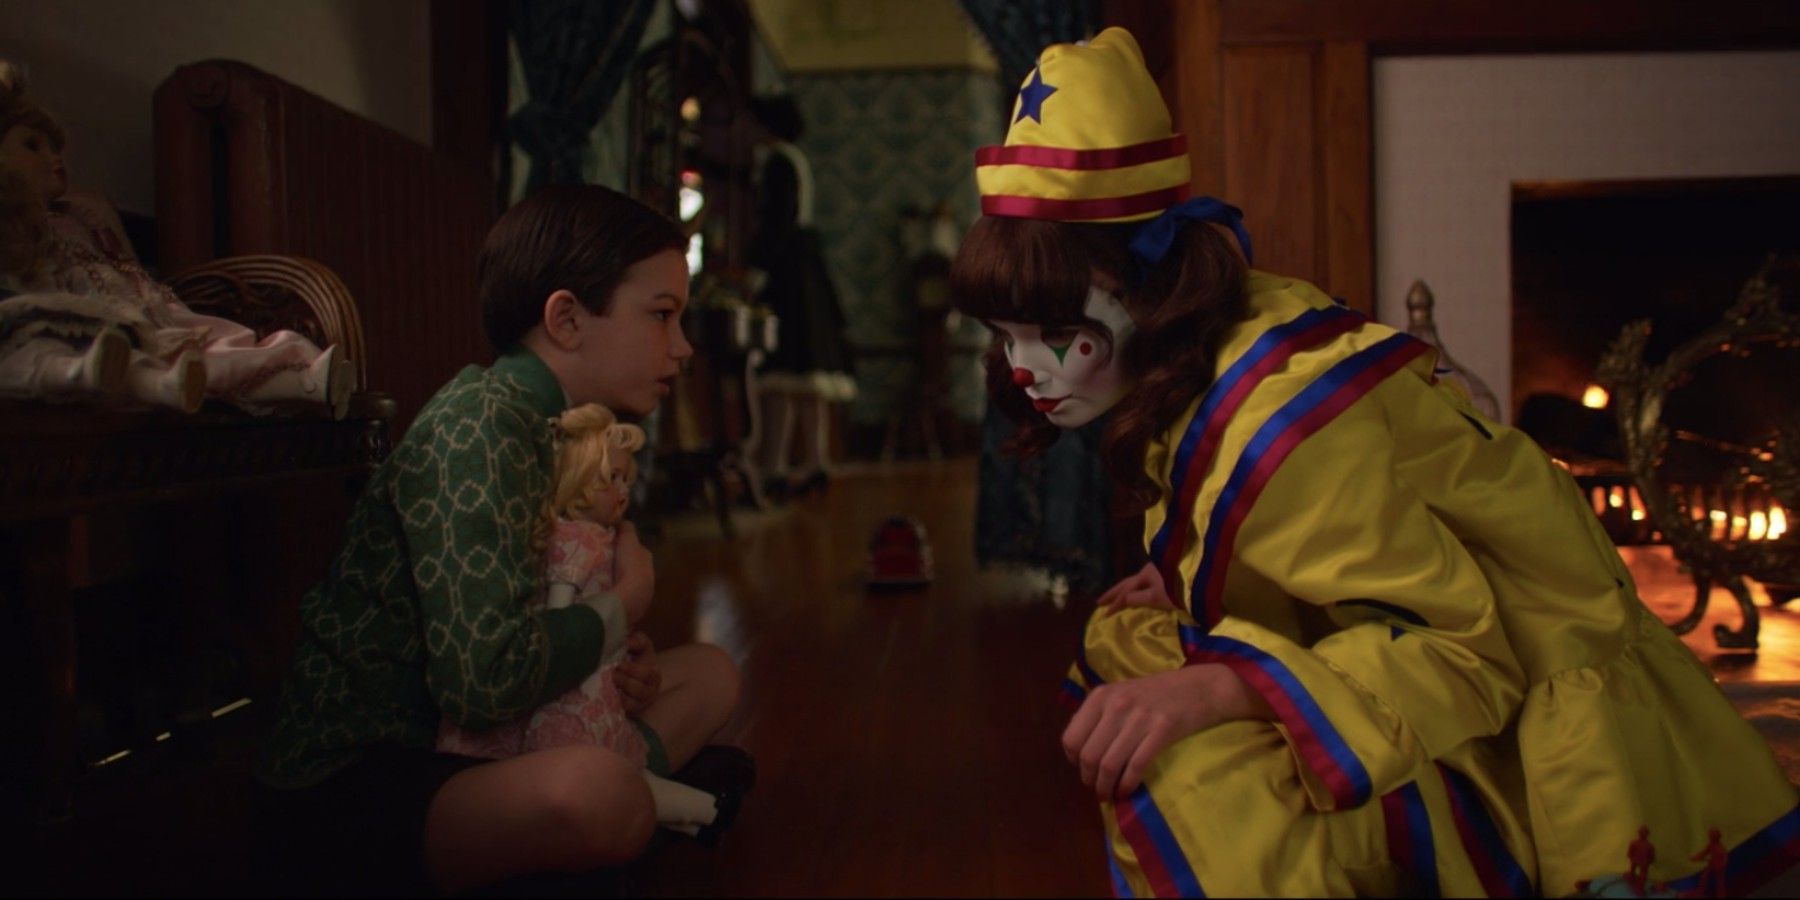 Otis (Houston Jax Towe) and Coby (Kristine Froseth) in American Horror Stories